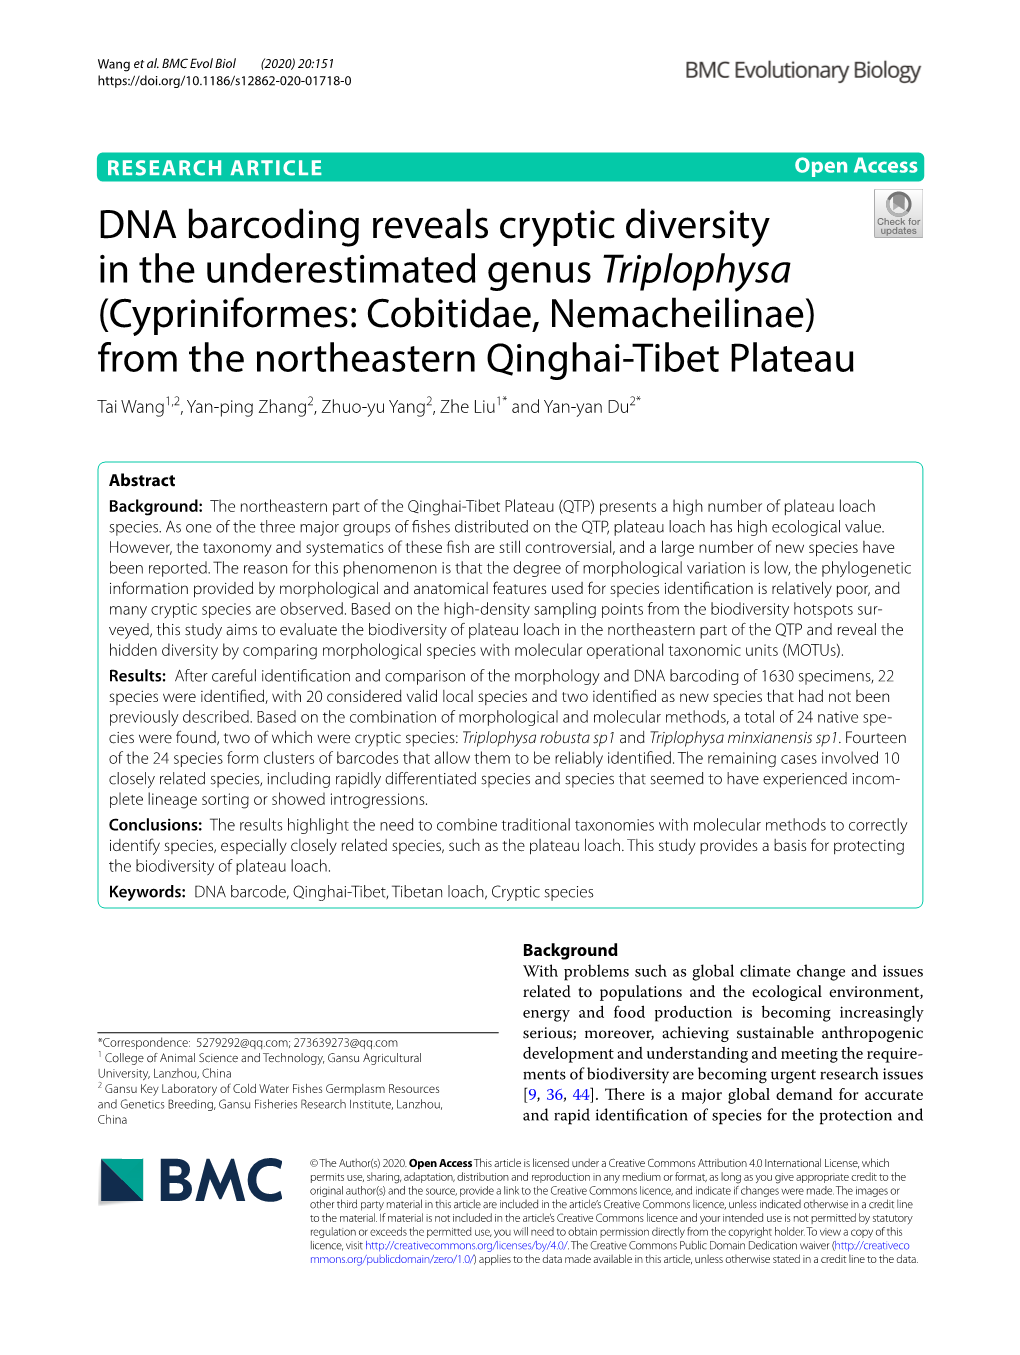 DNA Barcoding Reveals Cryptic Diversity in the Underestimated Genus